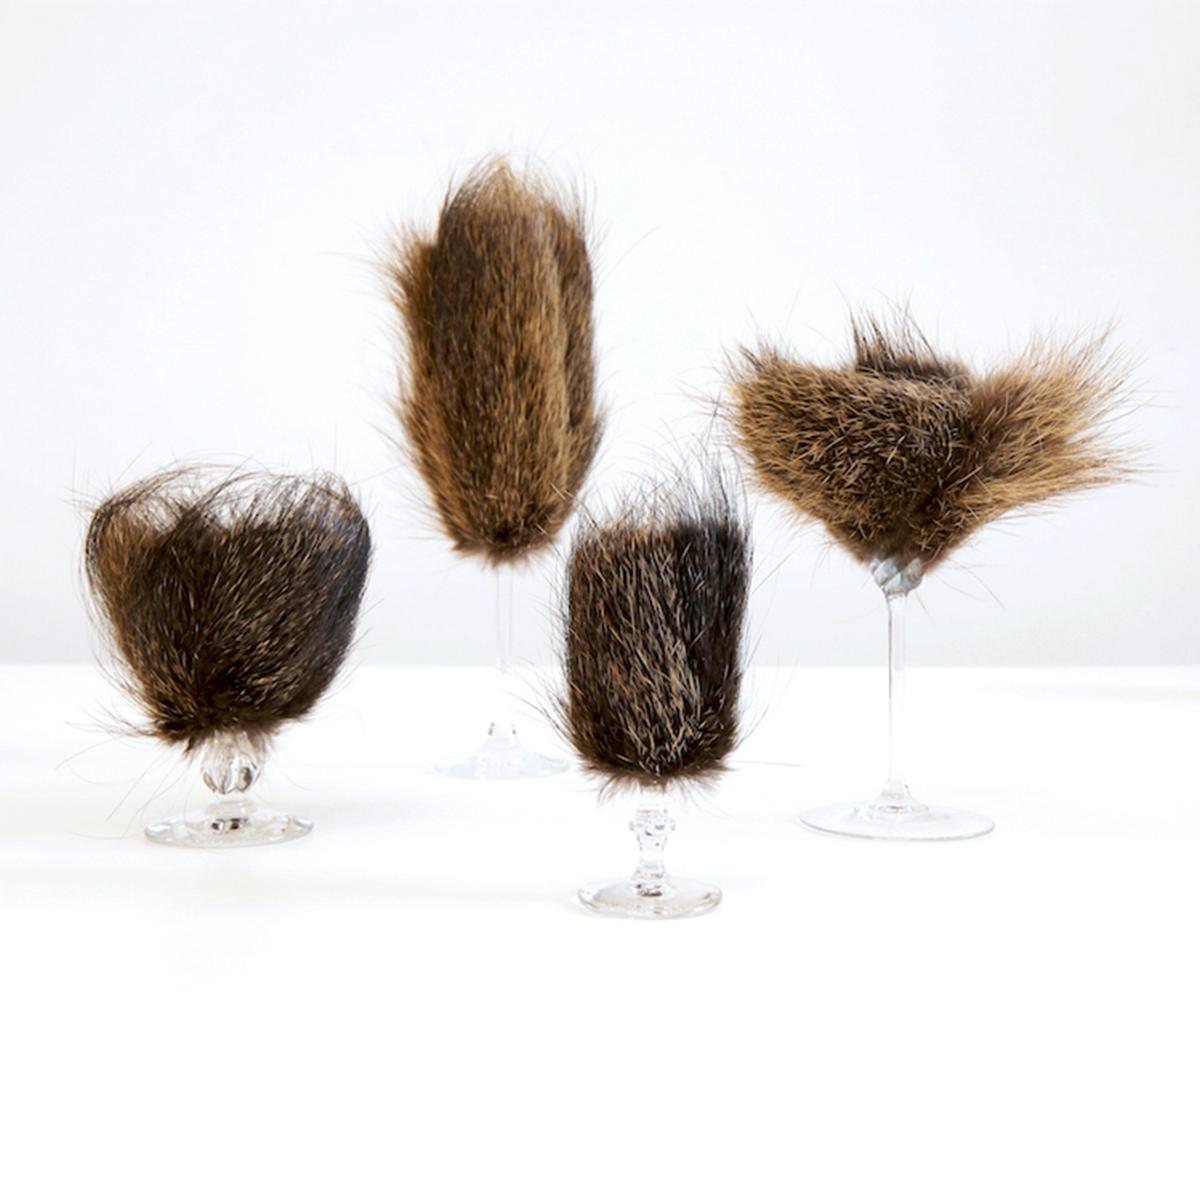 Nutria fur and found object
Limited edition of 3 